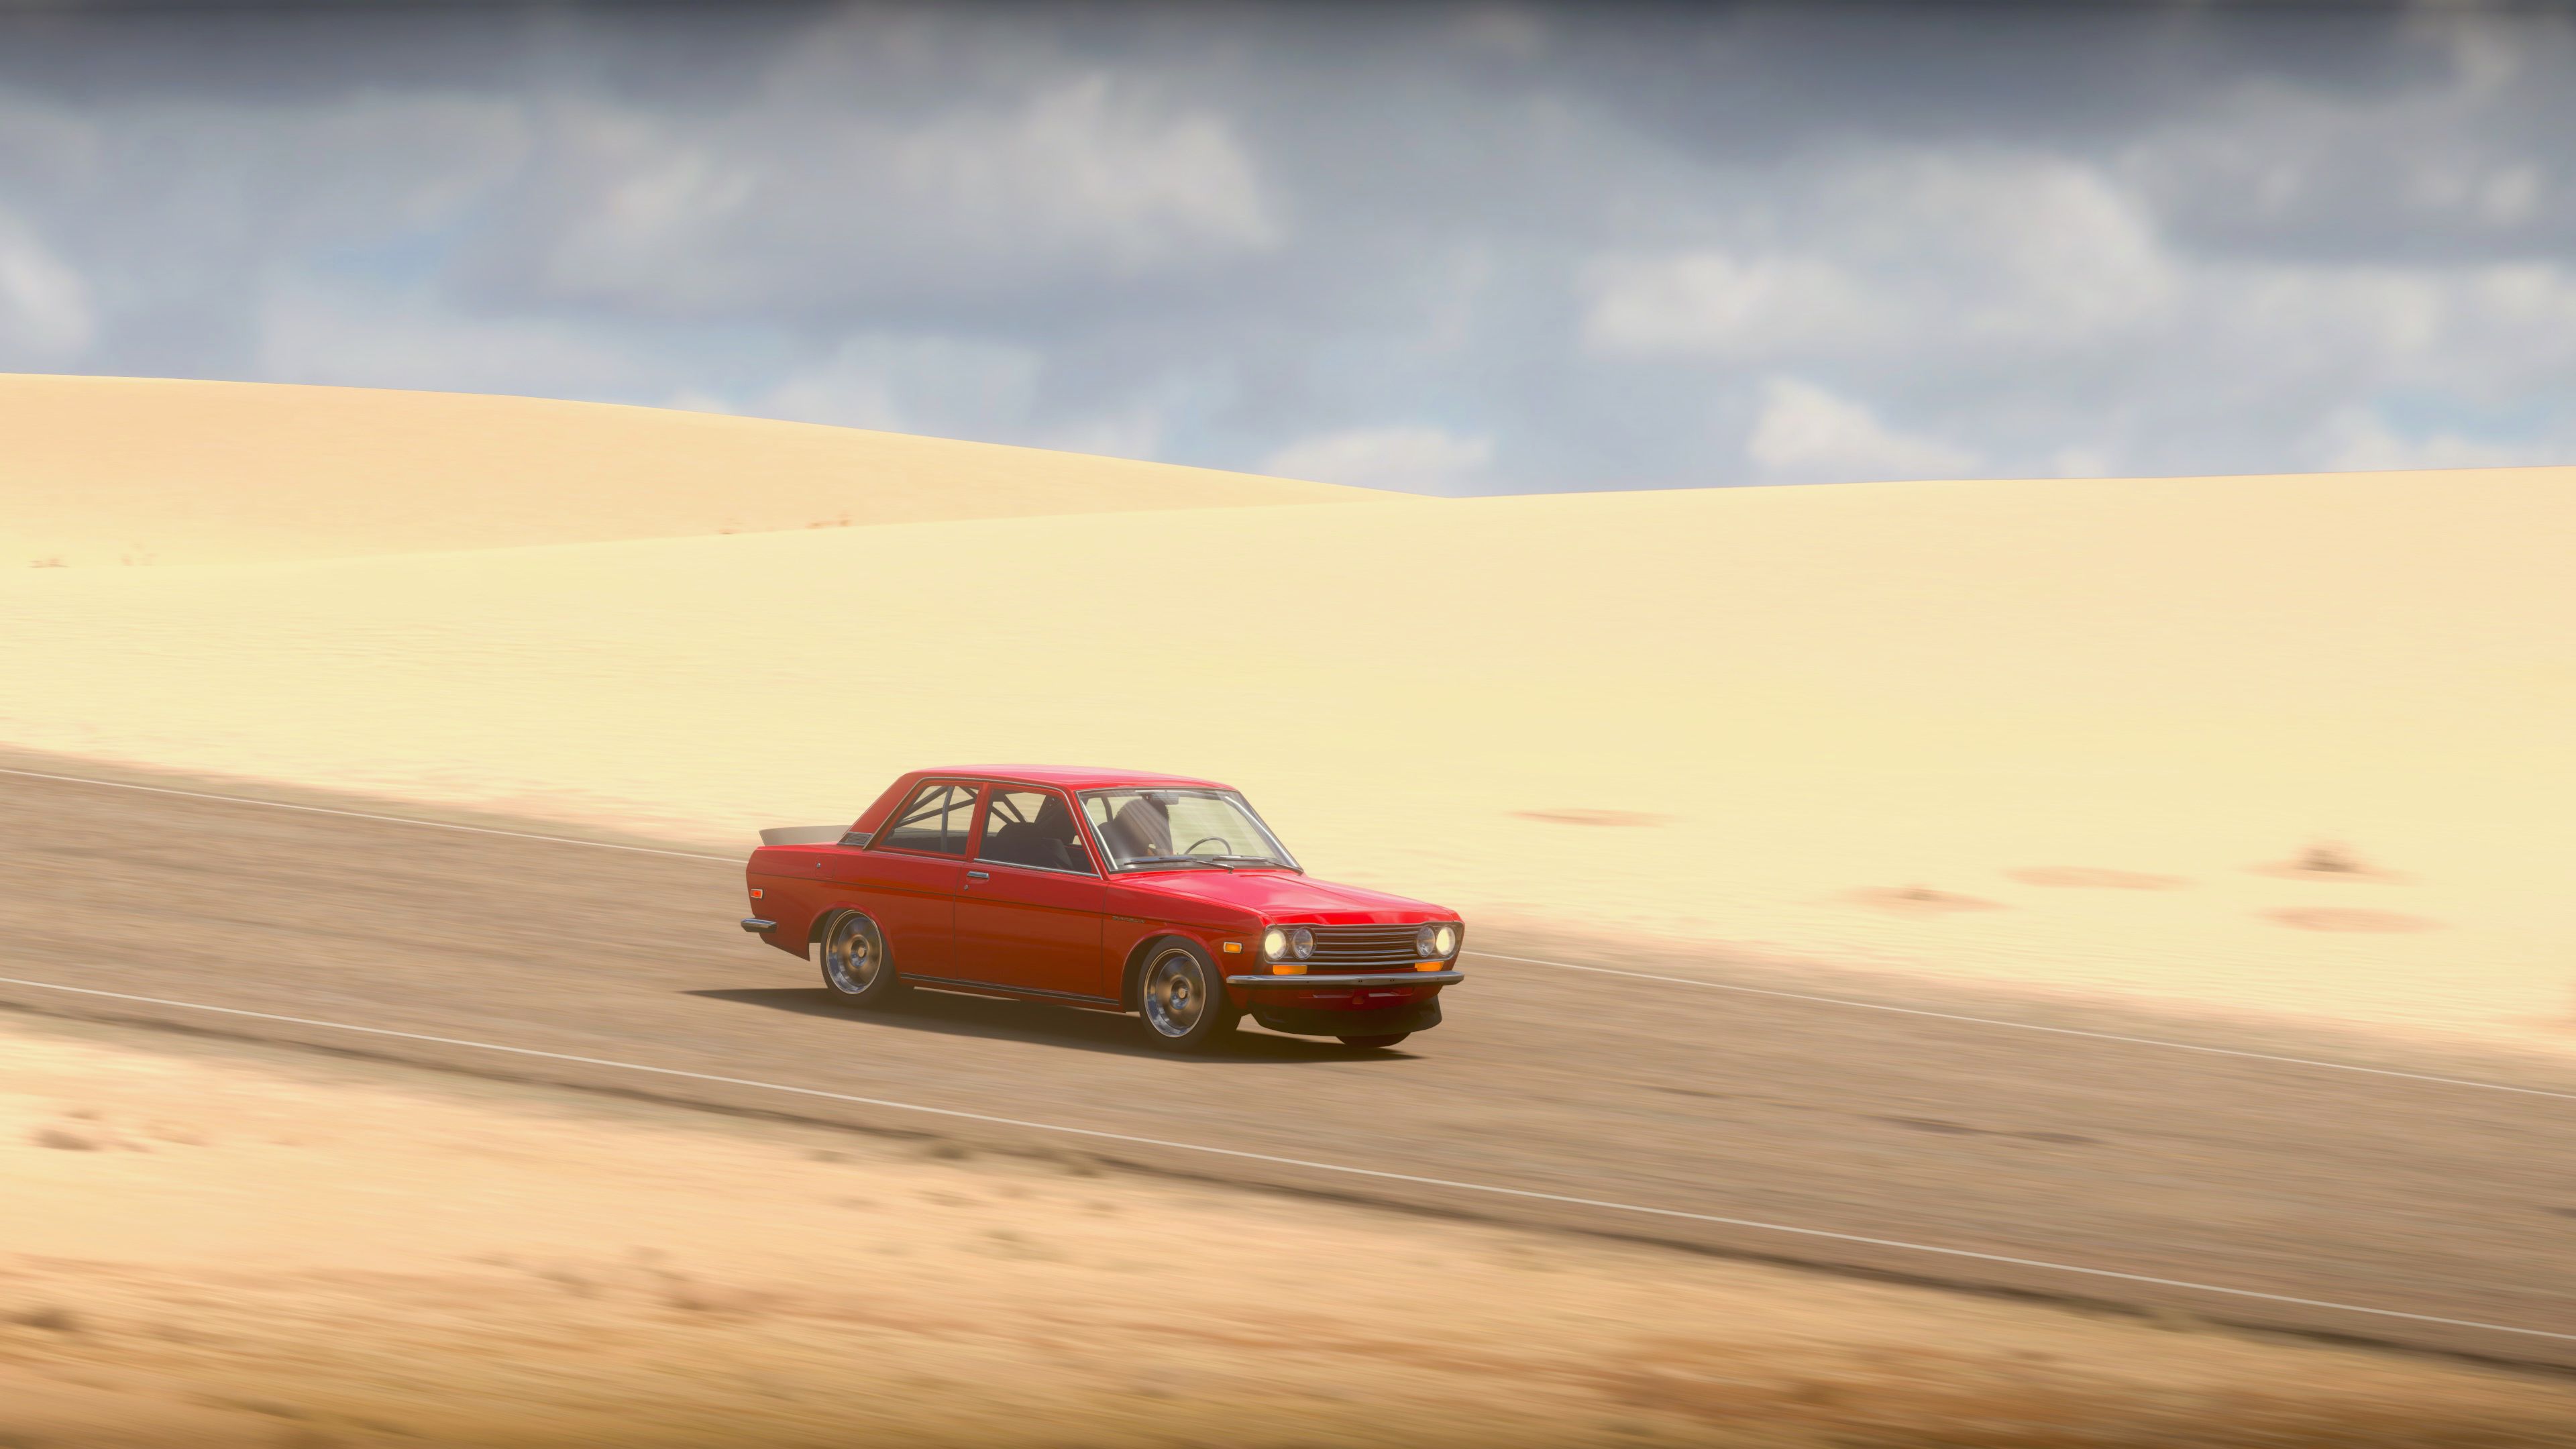 A screenshot showing a hotted-up (pun unintended) red 1970 Datsun 510 driving along a road with rolling sand dunes behind it and clouds in the distance, and the sun blazing down. Just looking at it, it feels HOT.